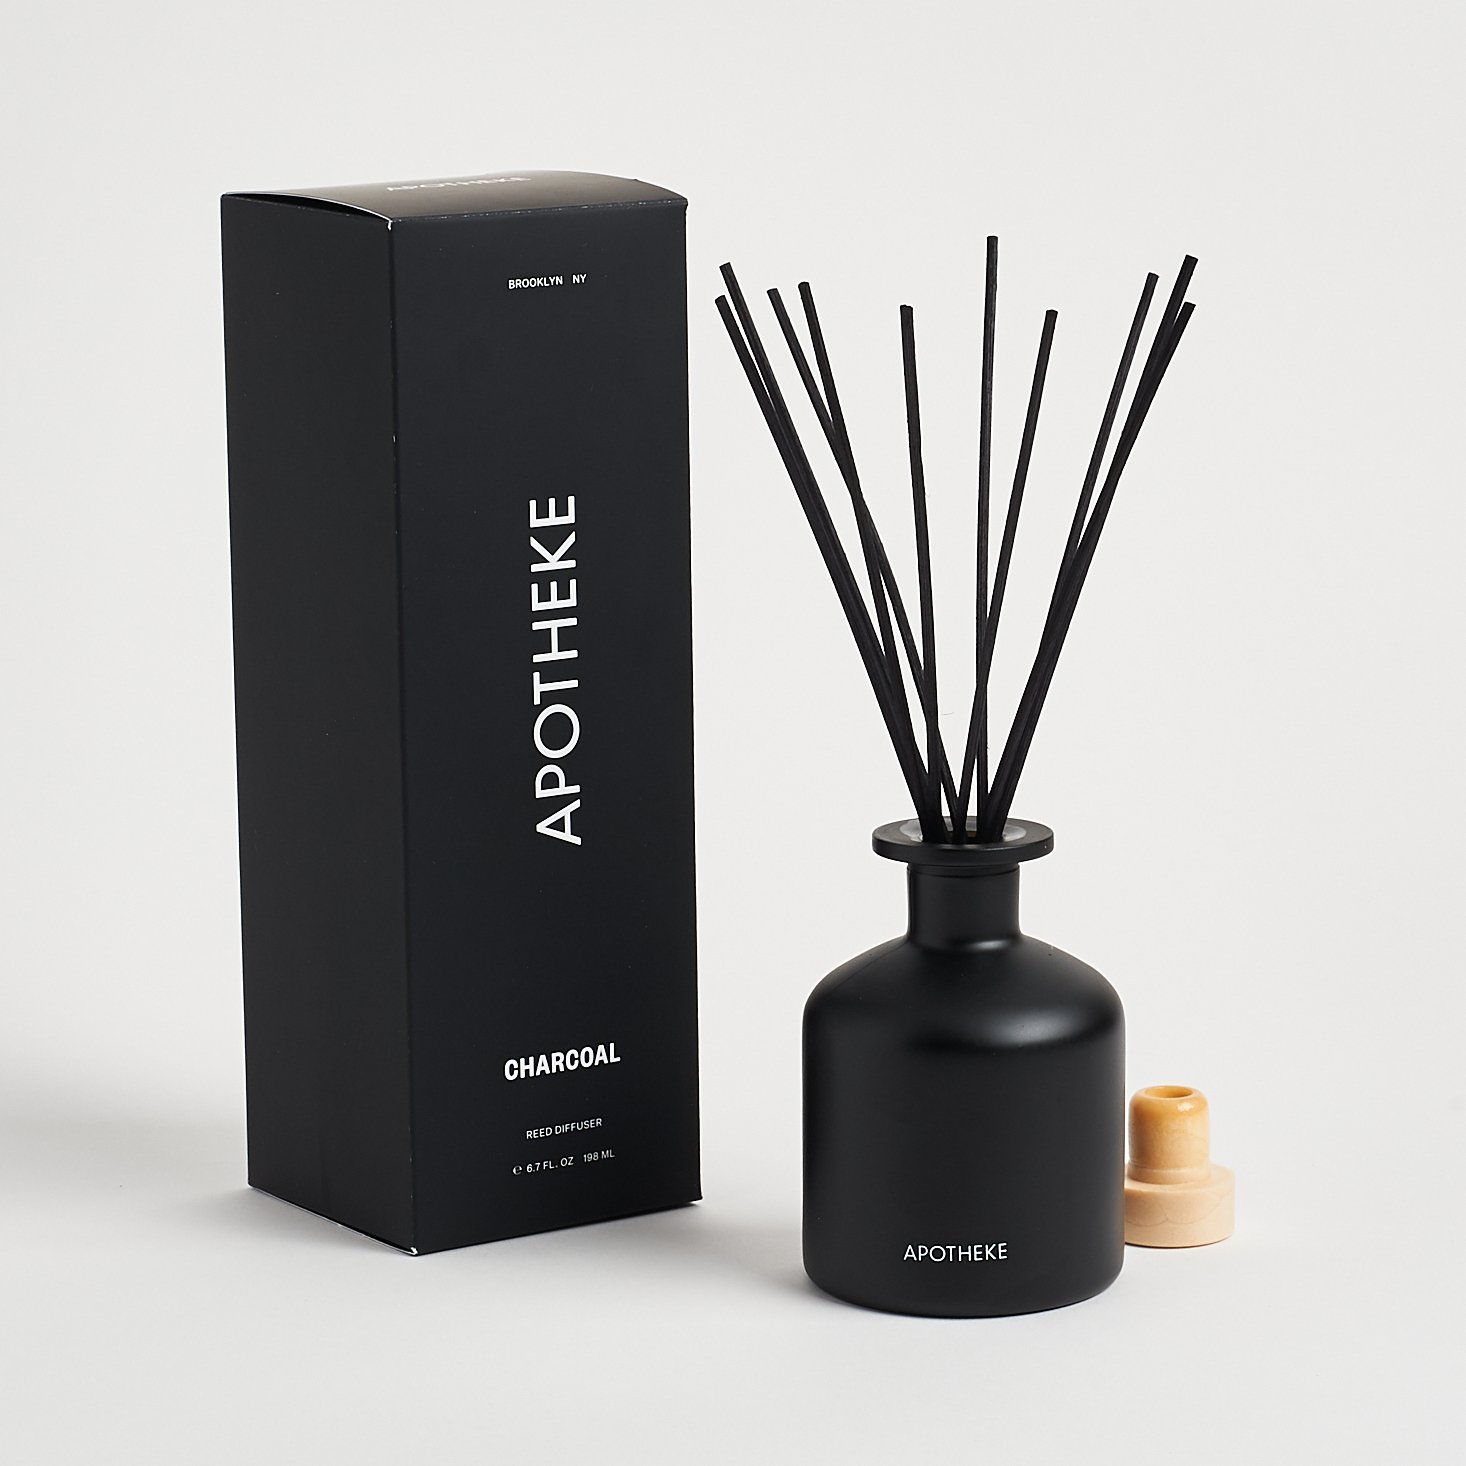 Apotheke Charcoal Diffuser with reeds in, next to box